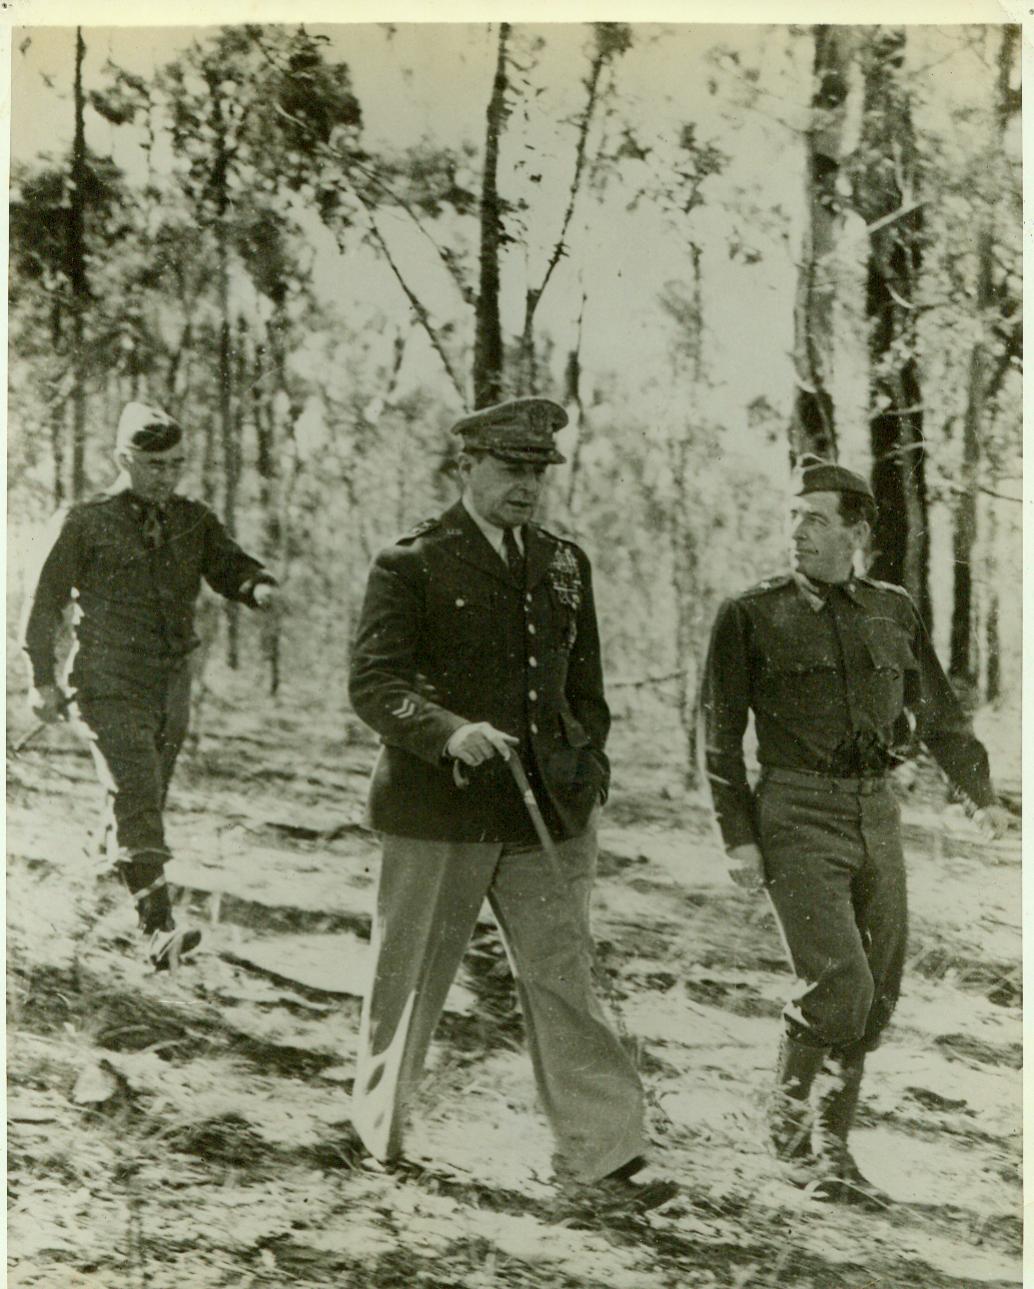 MacArthur Goes on Inspection Trip, 9/6/1942. General Douglas MacArthur (center) walks with officers of an American Division during an inspection trip “somewhere in Australia”.  9/6/42 (ACME;